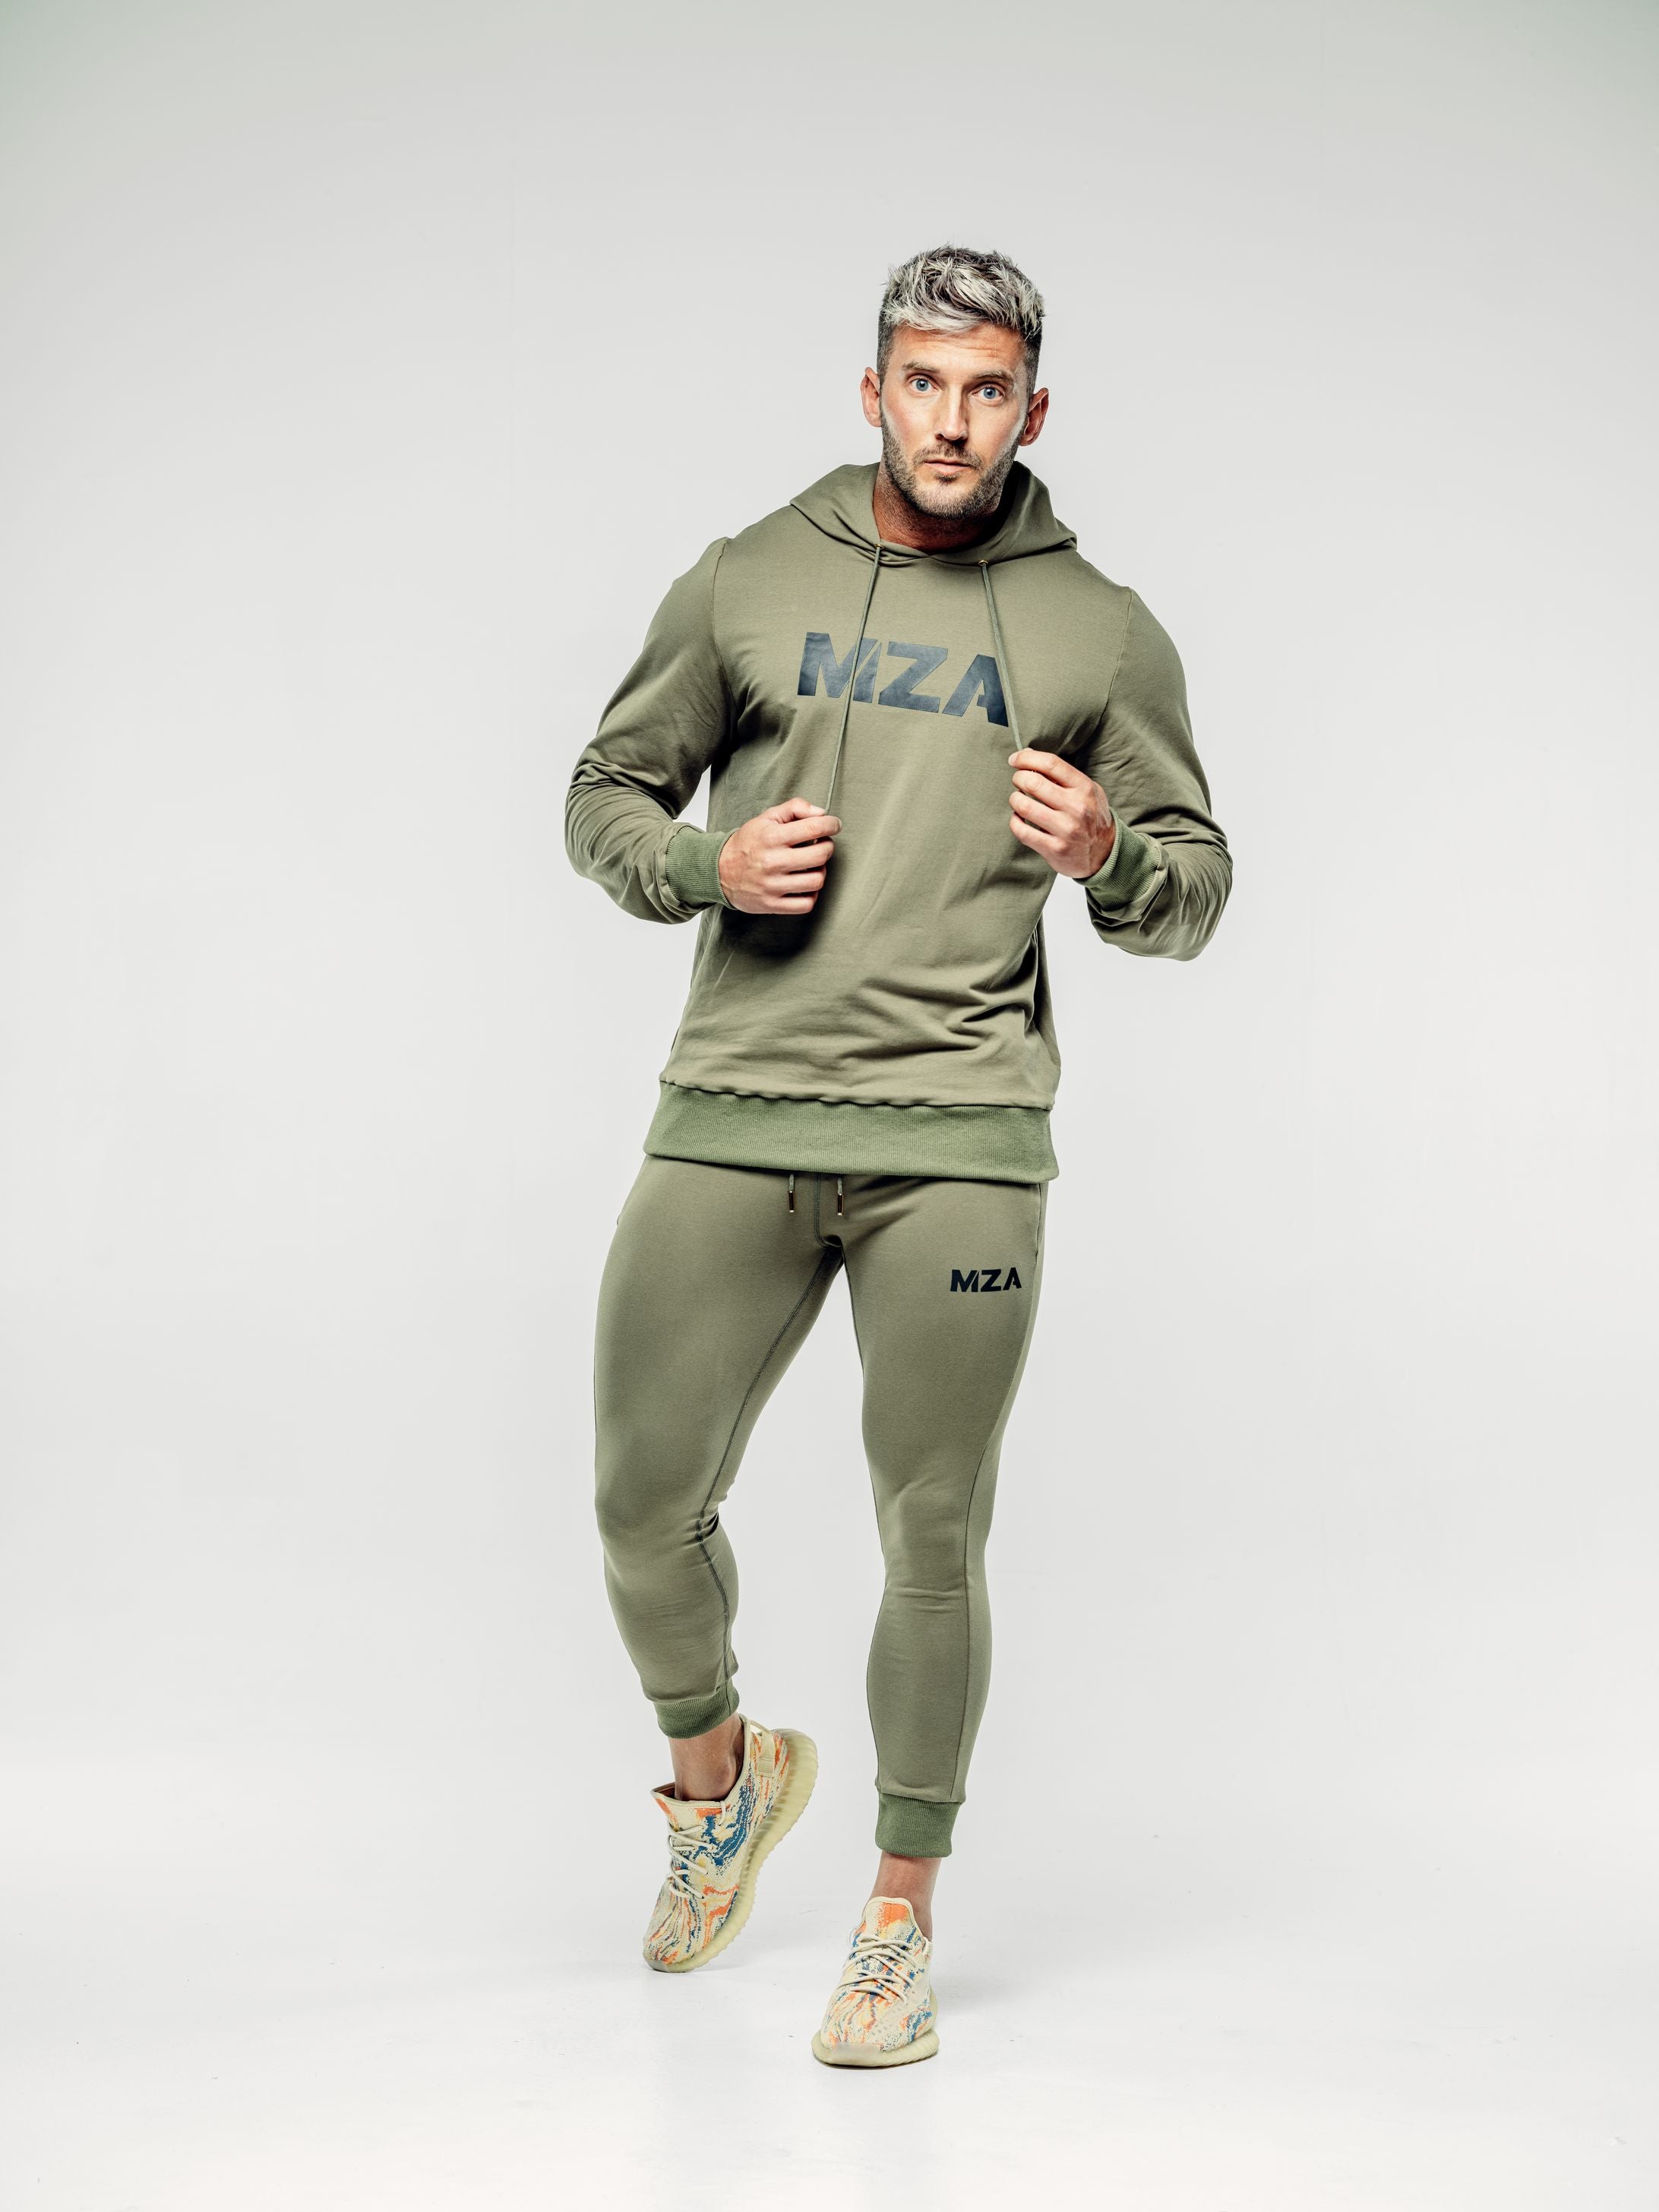 This is Shane wearing the New standard hoodie and new standard joggers 2 piece in khaki.  Shane is taking a step forward and is holding both strings from the neck of his hoodie